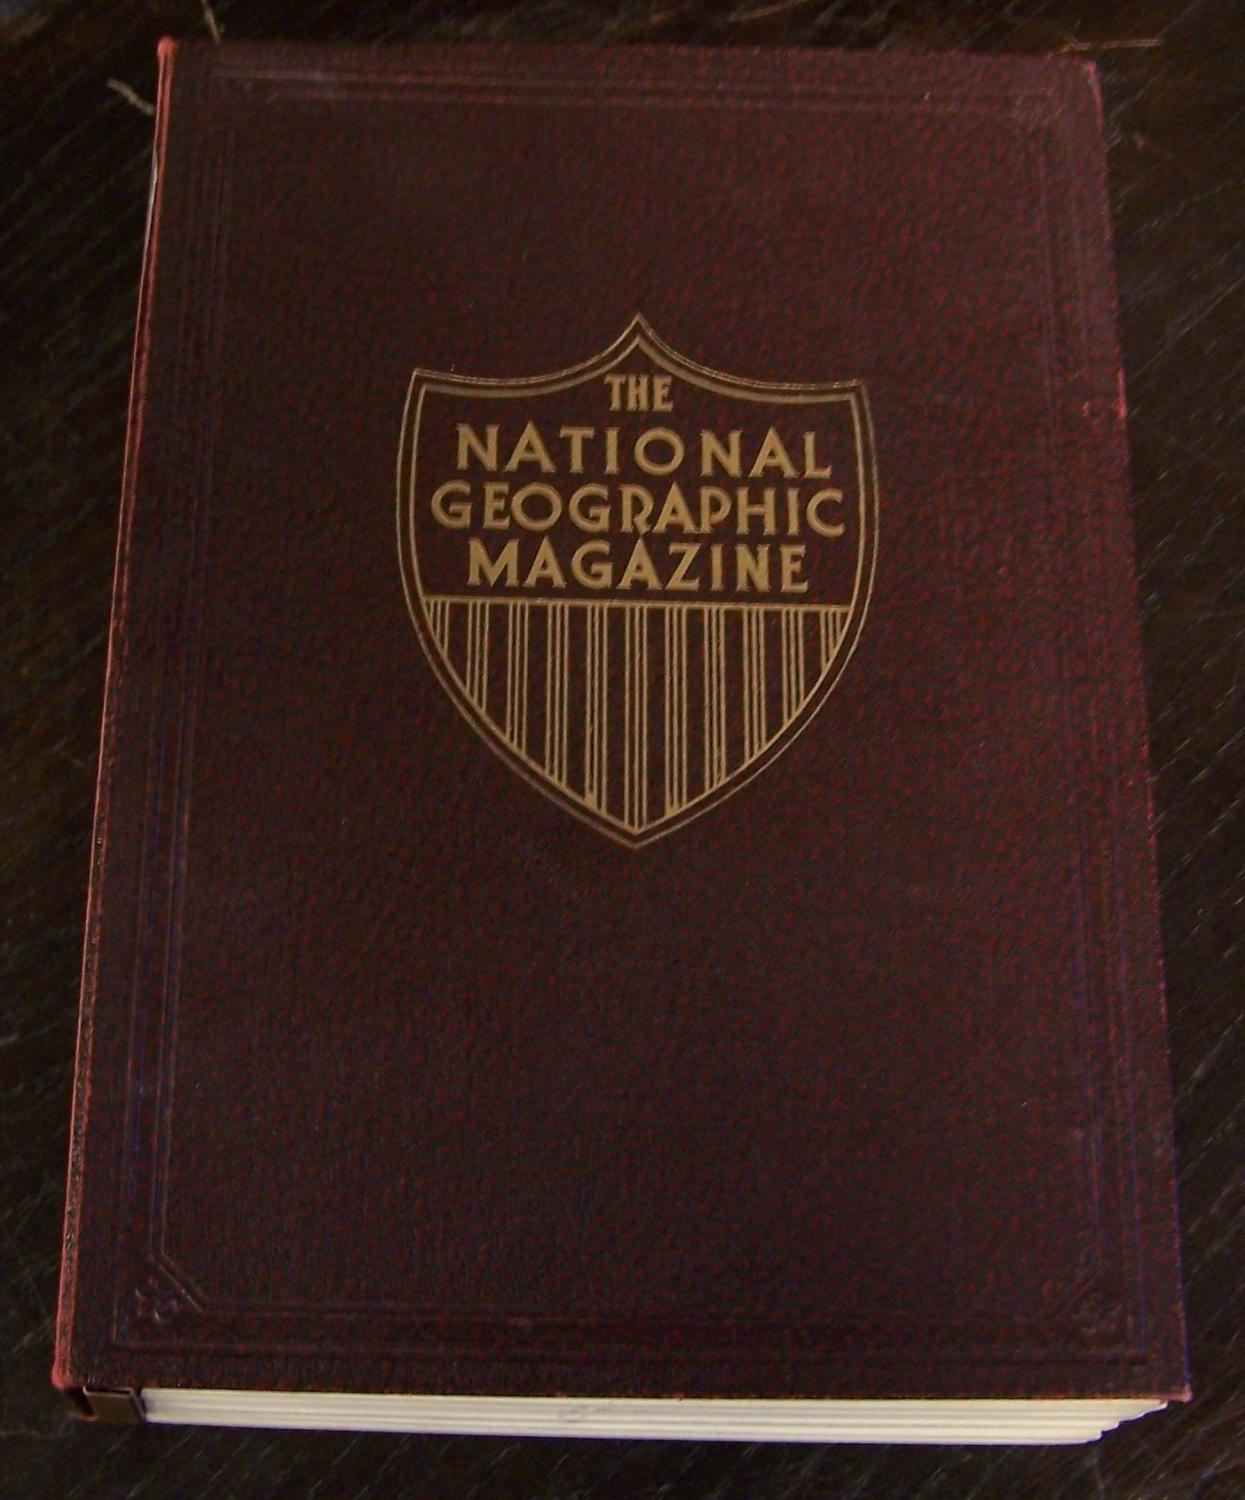 National Geographic Magazine, Vol. LXXII. July-December 1937: Very Good ...